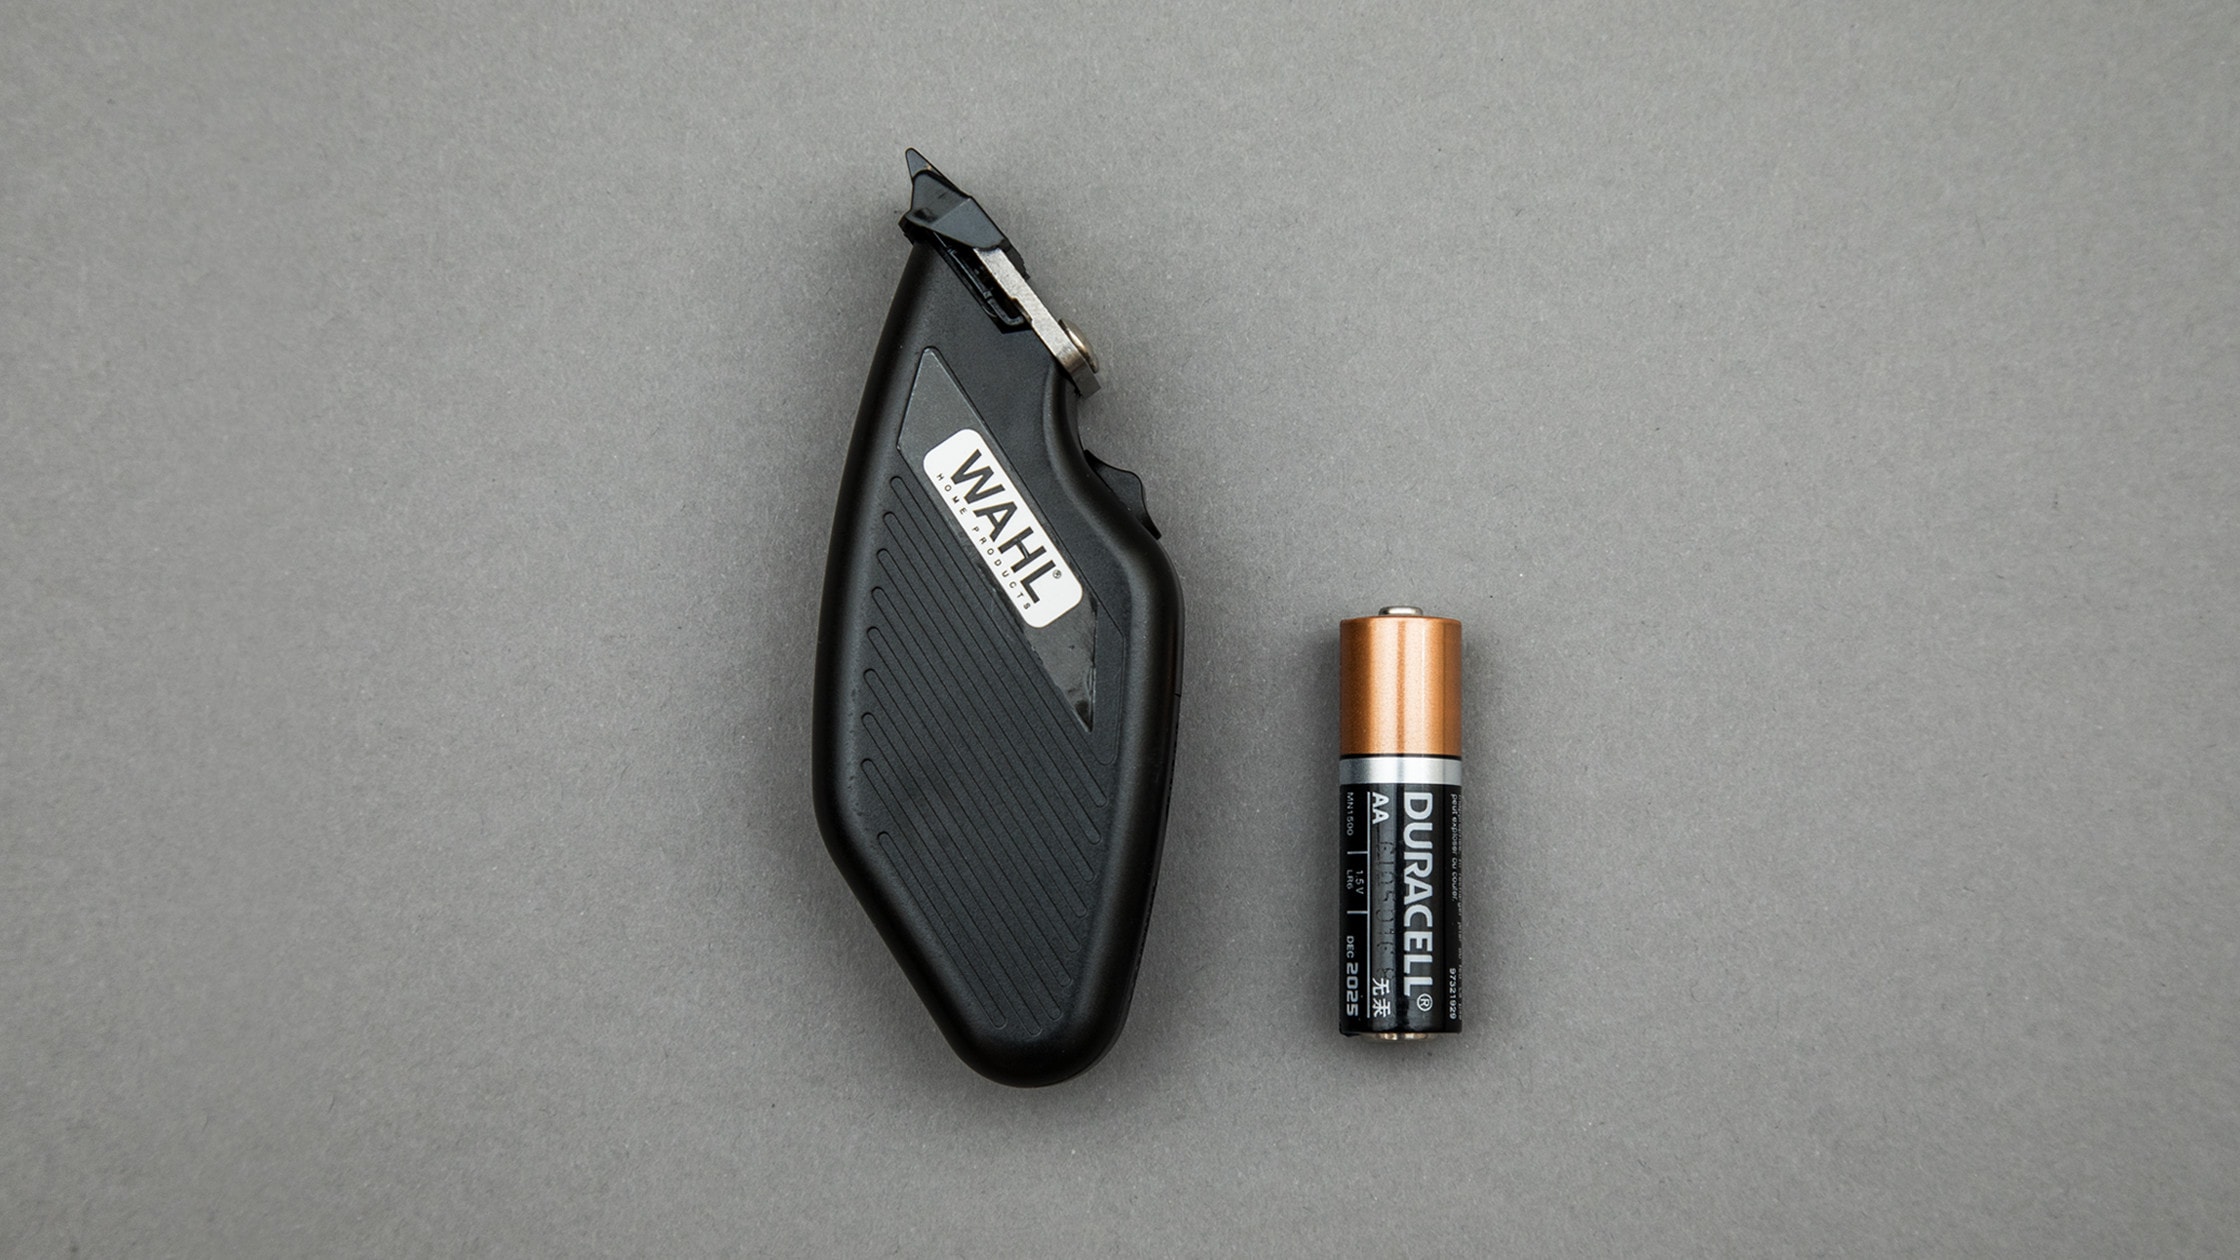 The WAHL Compact Travel Trimmer and a AA Battery